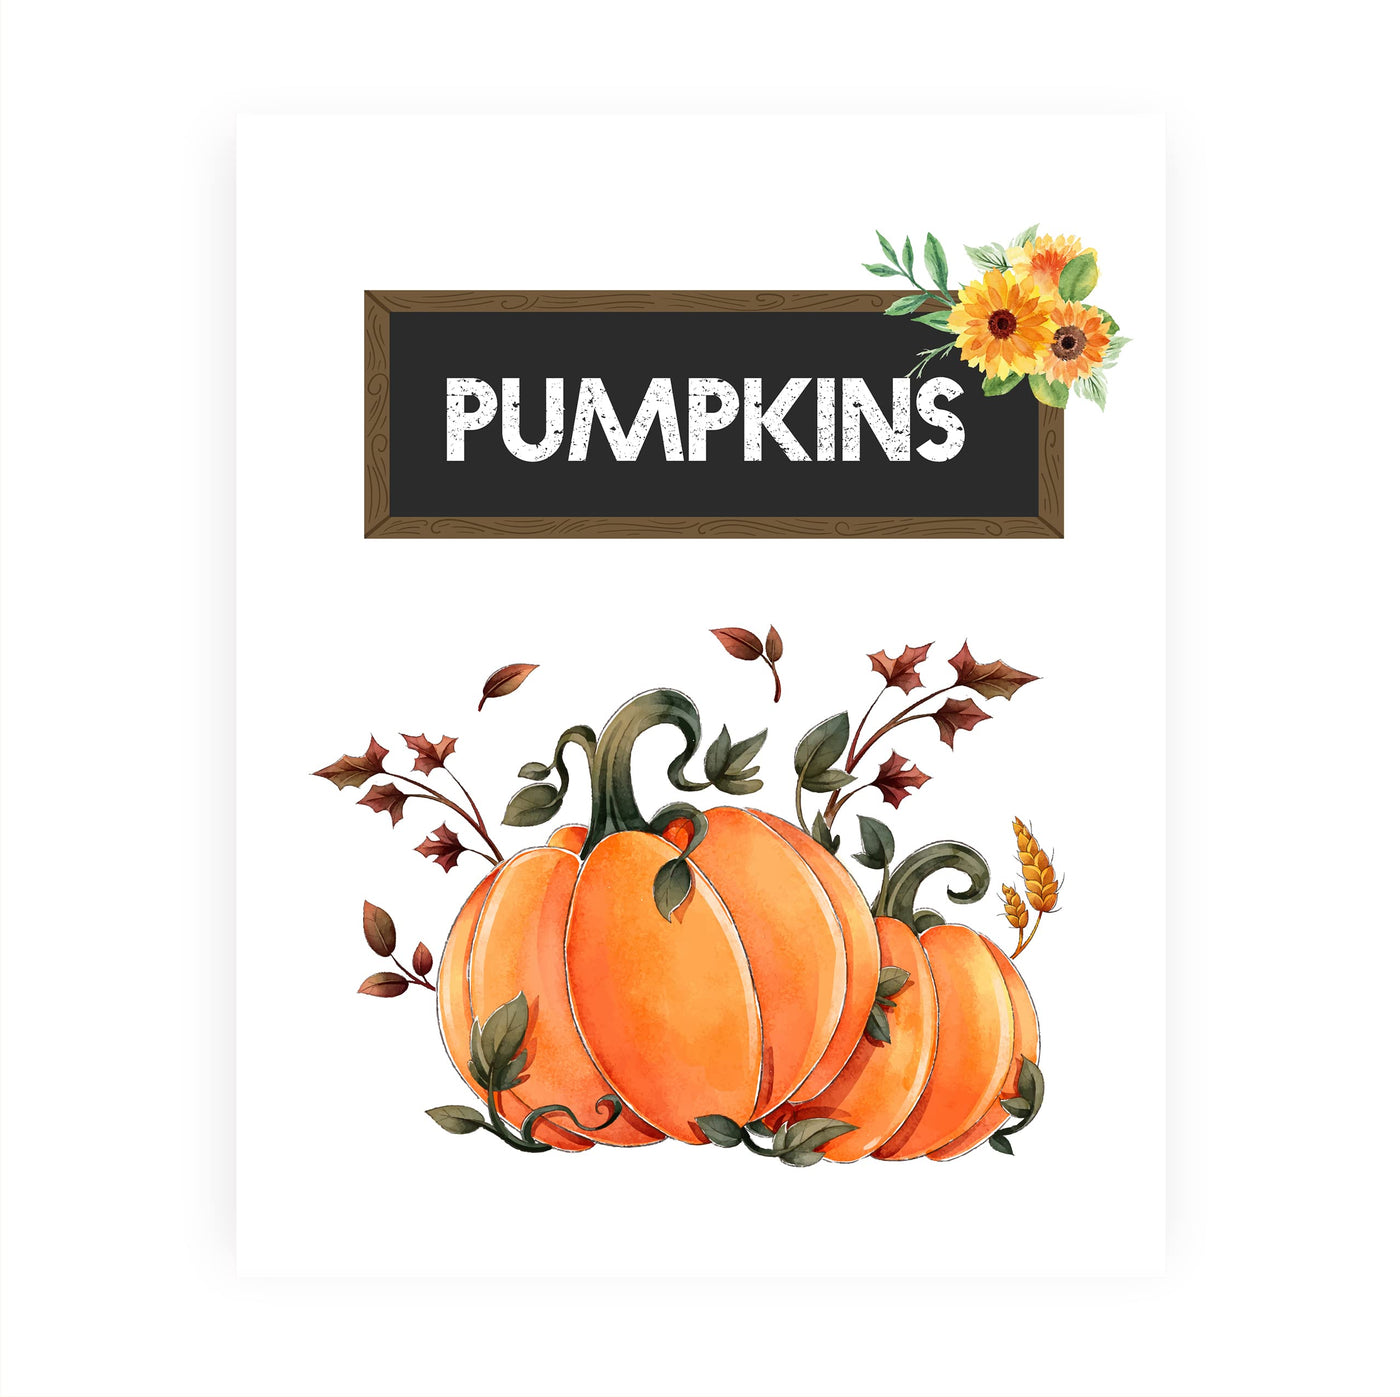 Pumpkins-Vintage Fall Wall Art Decor -8 x 10" Rustic Farmhouse Pumpkin Print w/Sunflower Images -Ready to Frame. Perfect for Home-Halloween-Thanksgiving-Sunflowers Decor! Printed on Photo Paper.